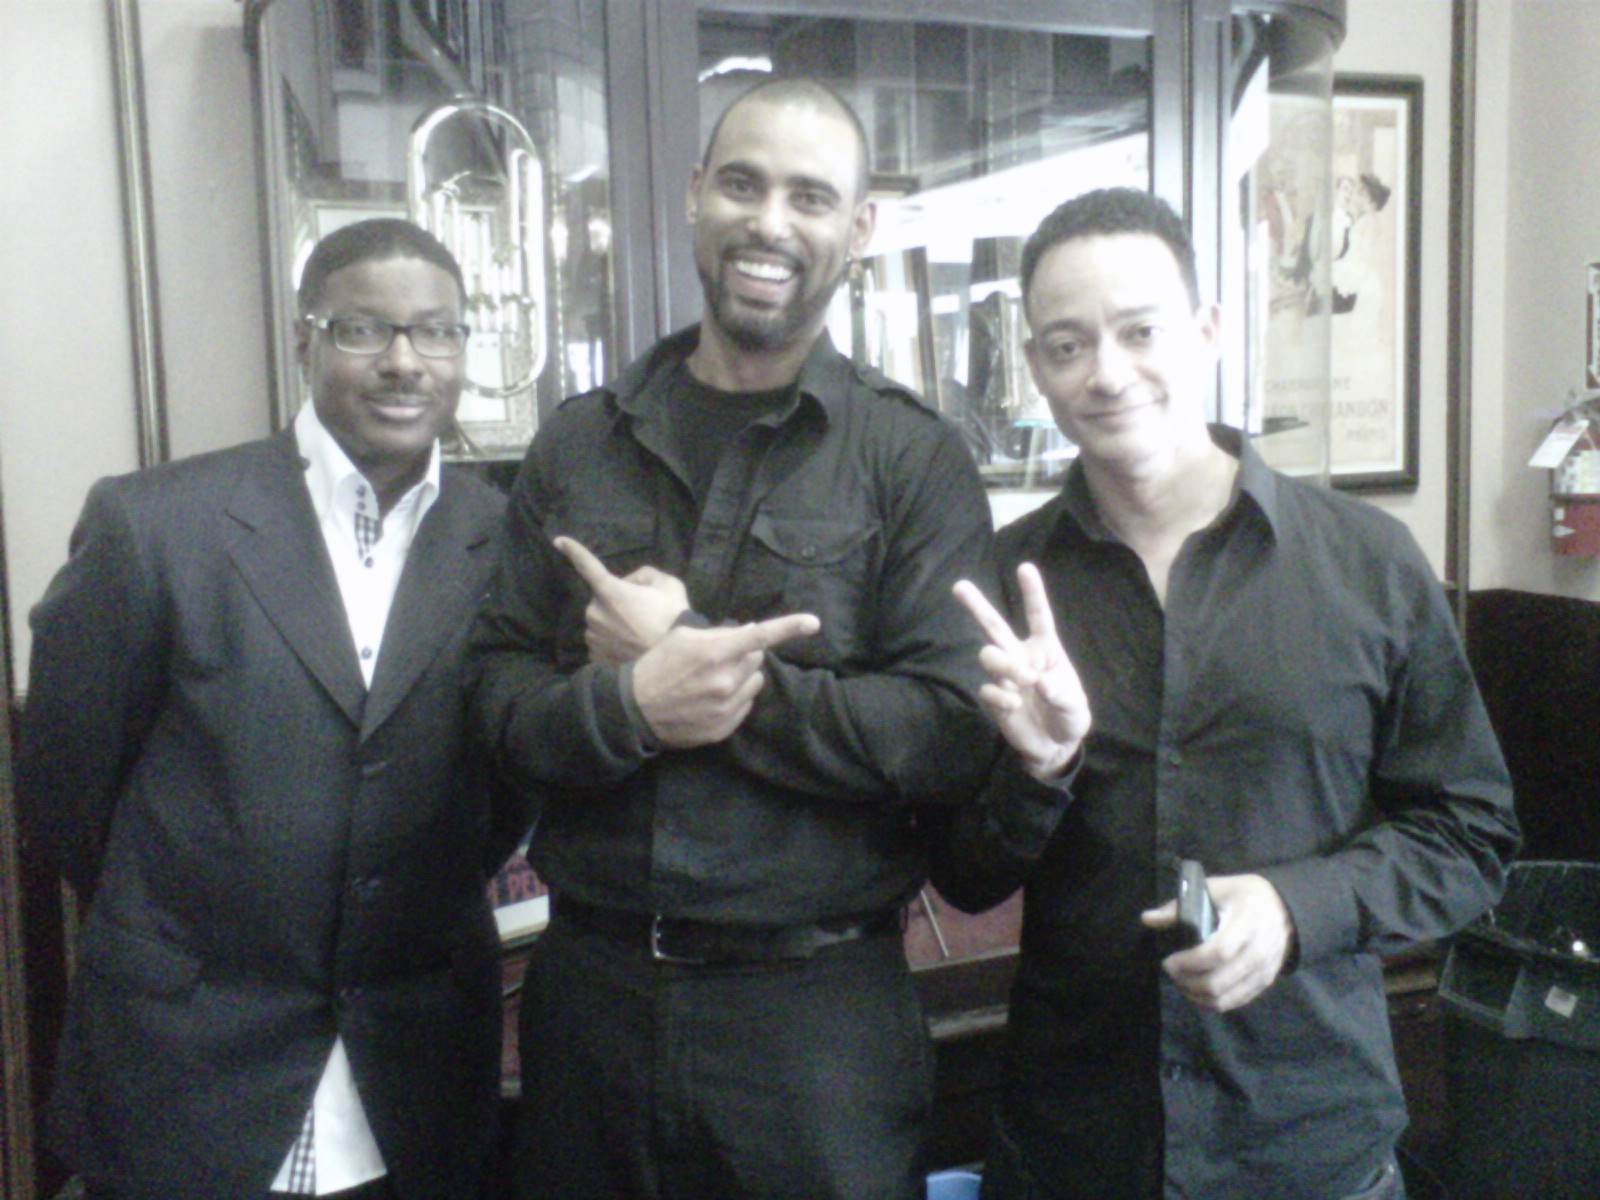 Me and Kid 'N' Play on set of the TV Pilot Funny Business